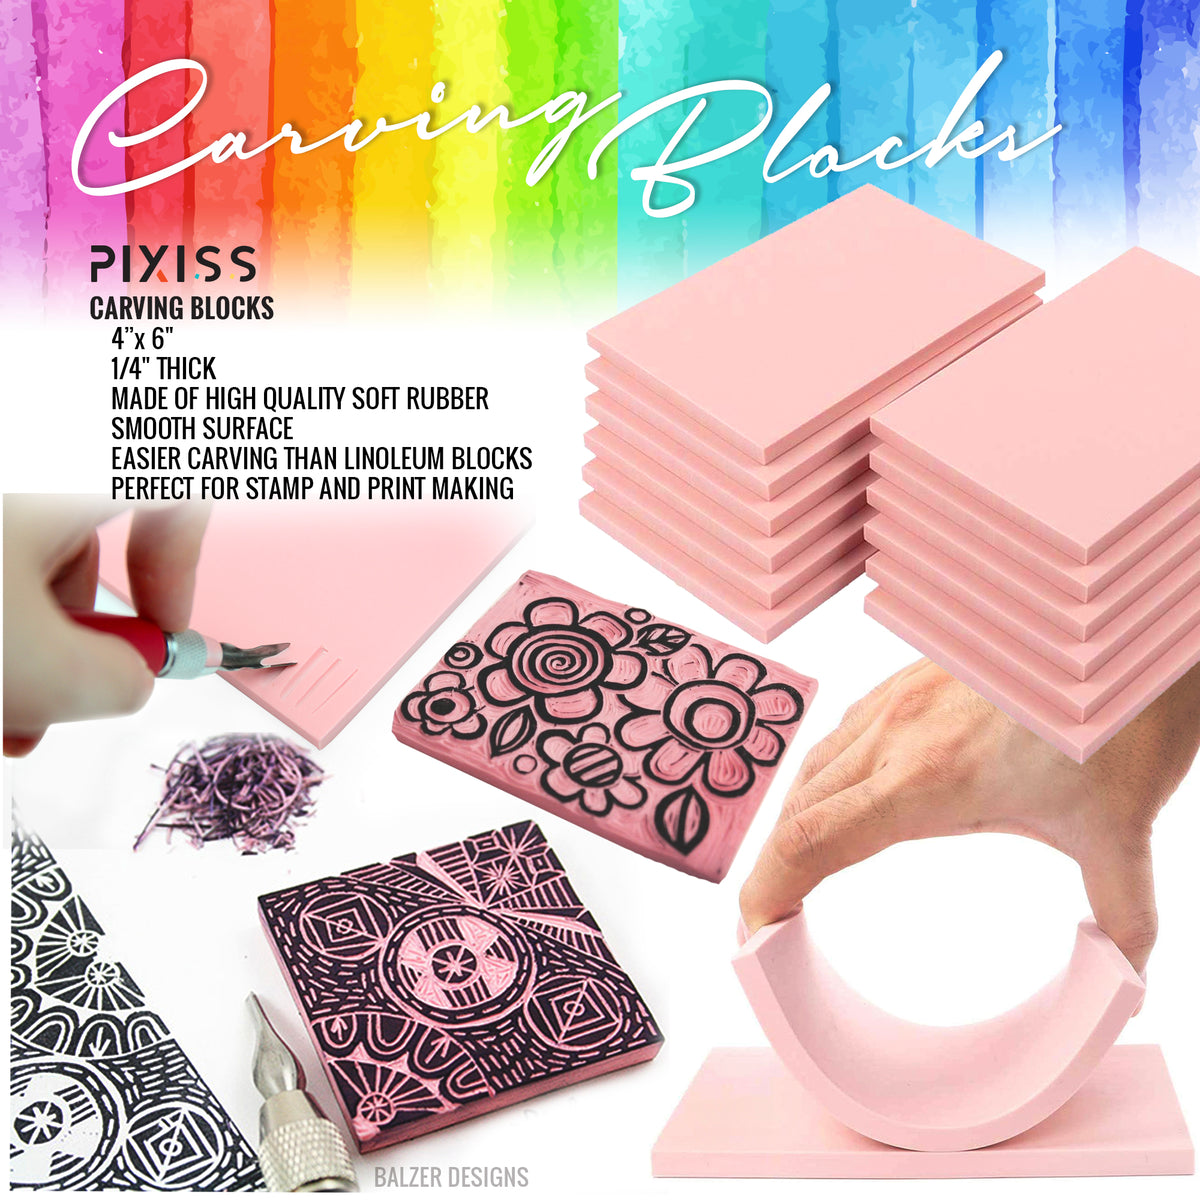 Rubber Stamp Making Kit,Block Printing Tool Kit,Linoleum Cutter with 6 Type  Blades,Tracing Paper for Craft Stamp Carving 